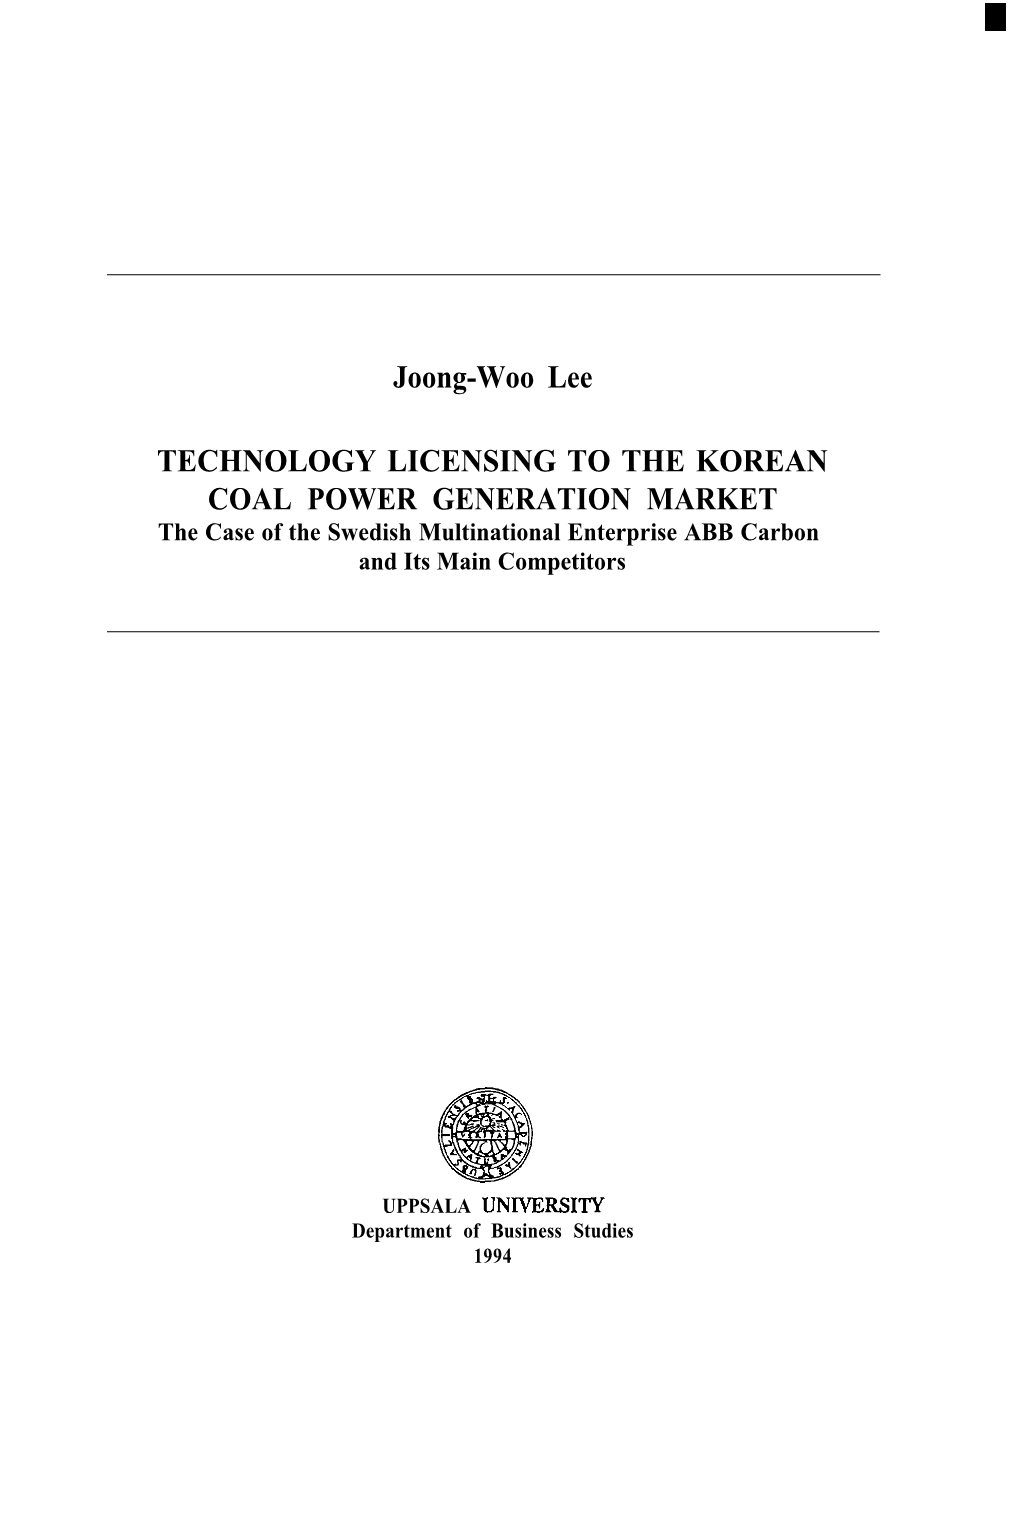 Joong-Woo Lee TECHNOLOGY LICENSING to the KOREAN